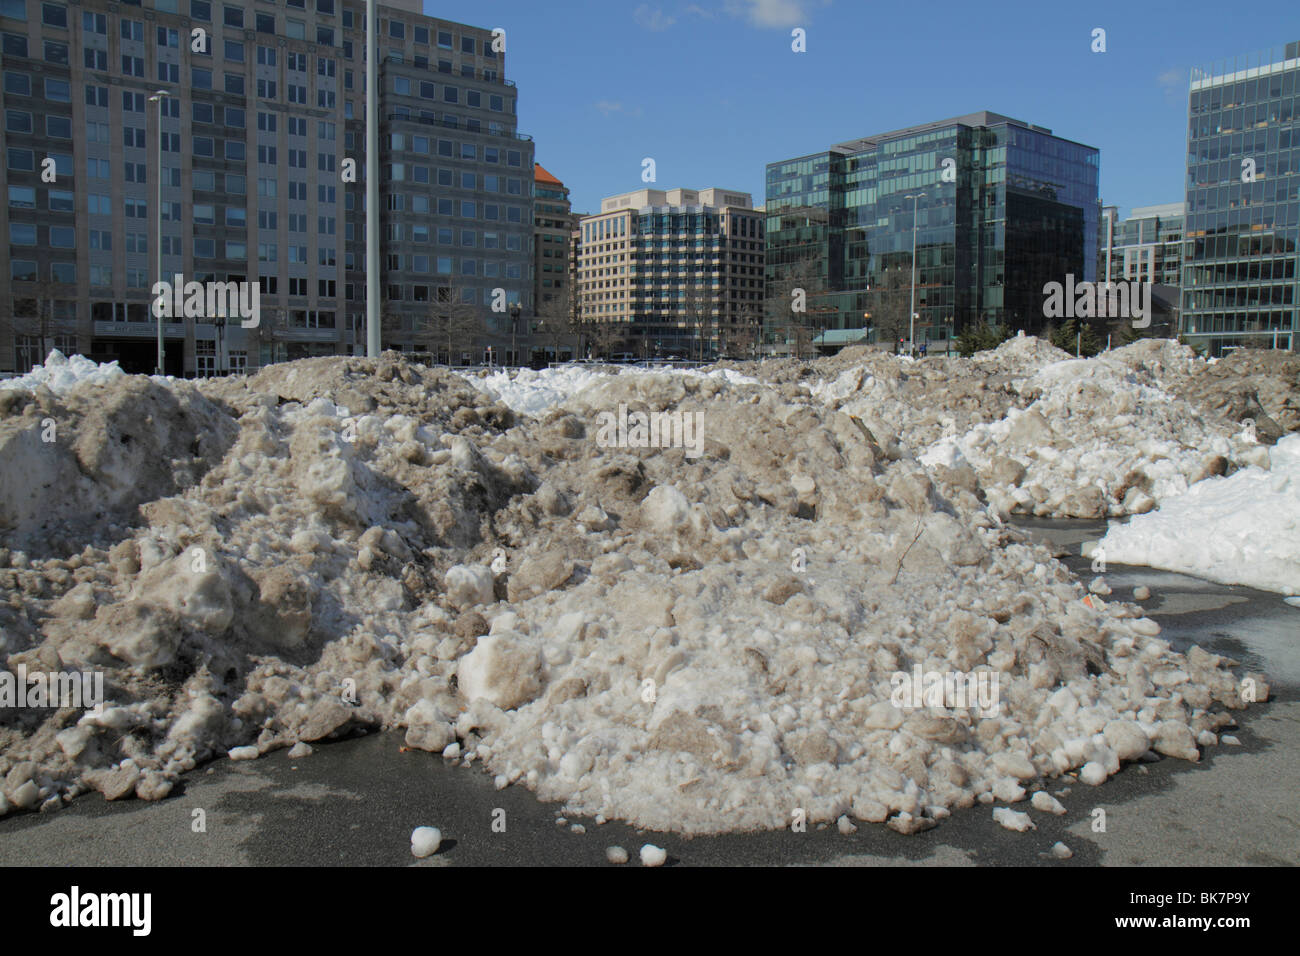 Washington DC,10th Street NW,dirty,grimy,snow,plowed,ice,thawing,melting,wet,pollution,winter,cold,weather,parking lot,office buildings,city skyline,r Stock Photo